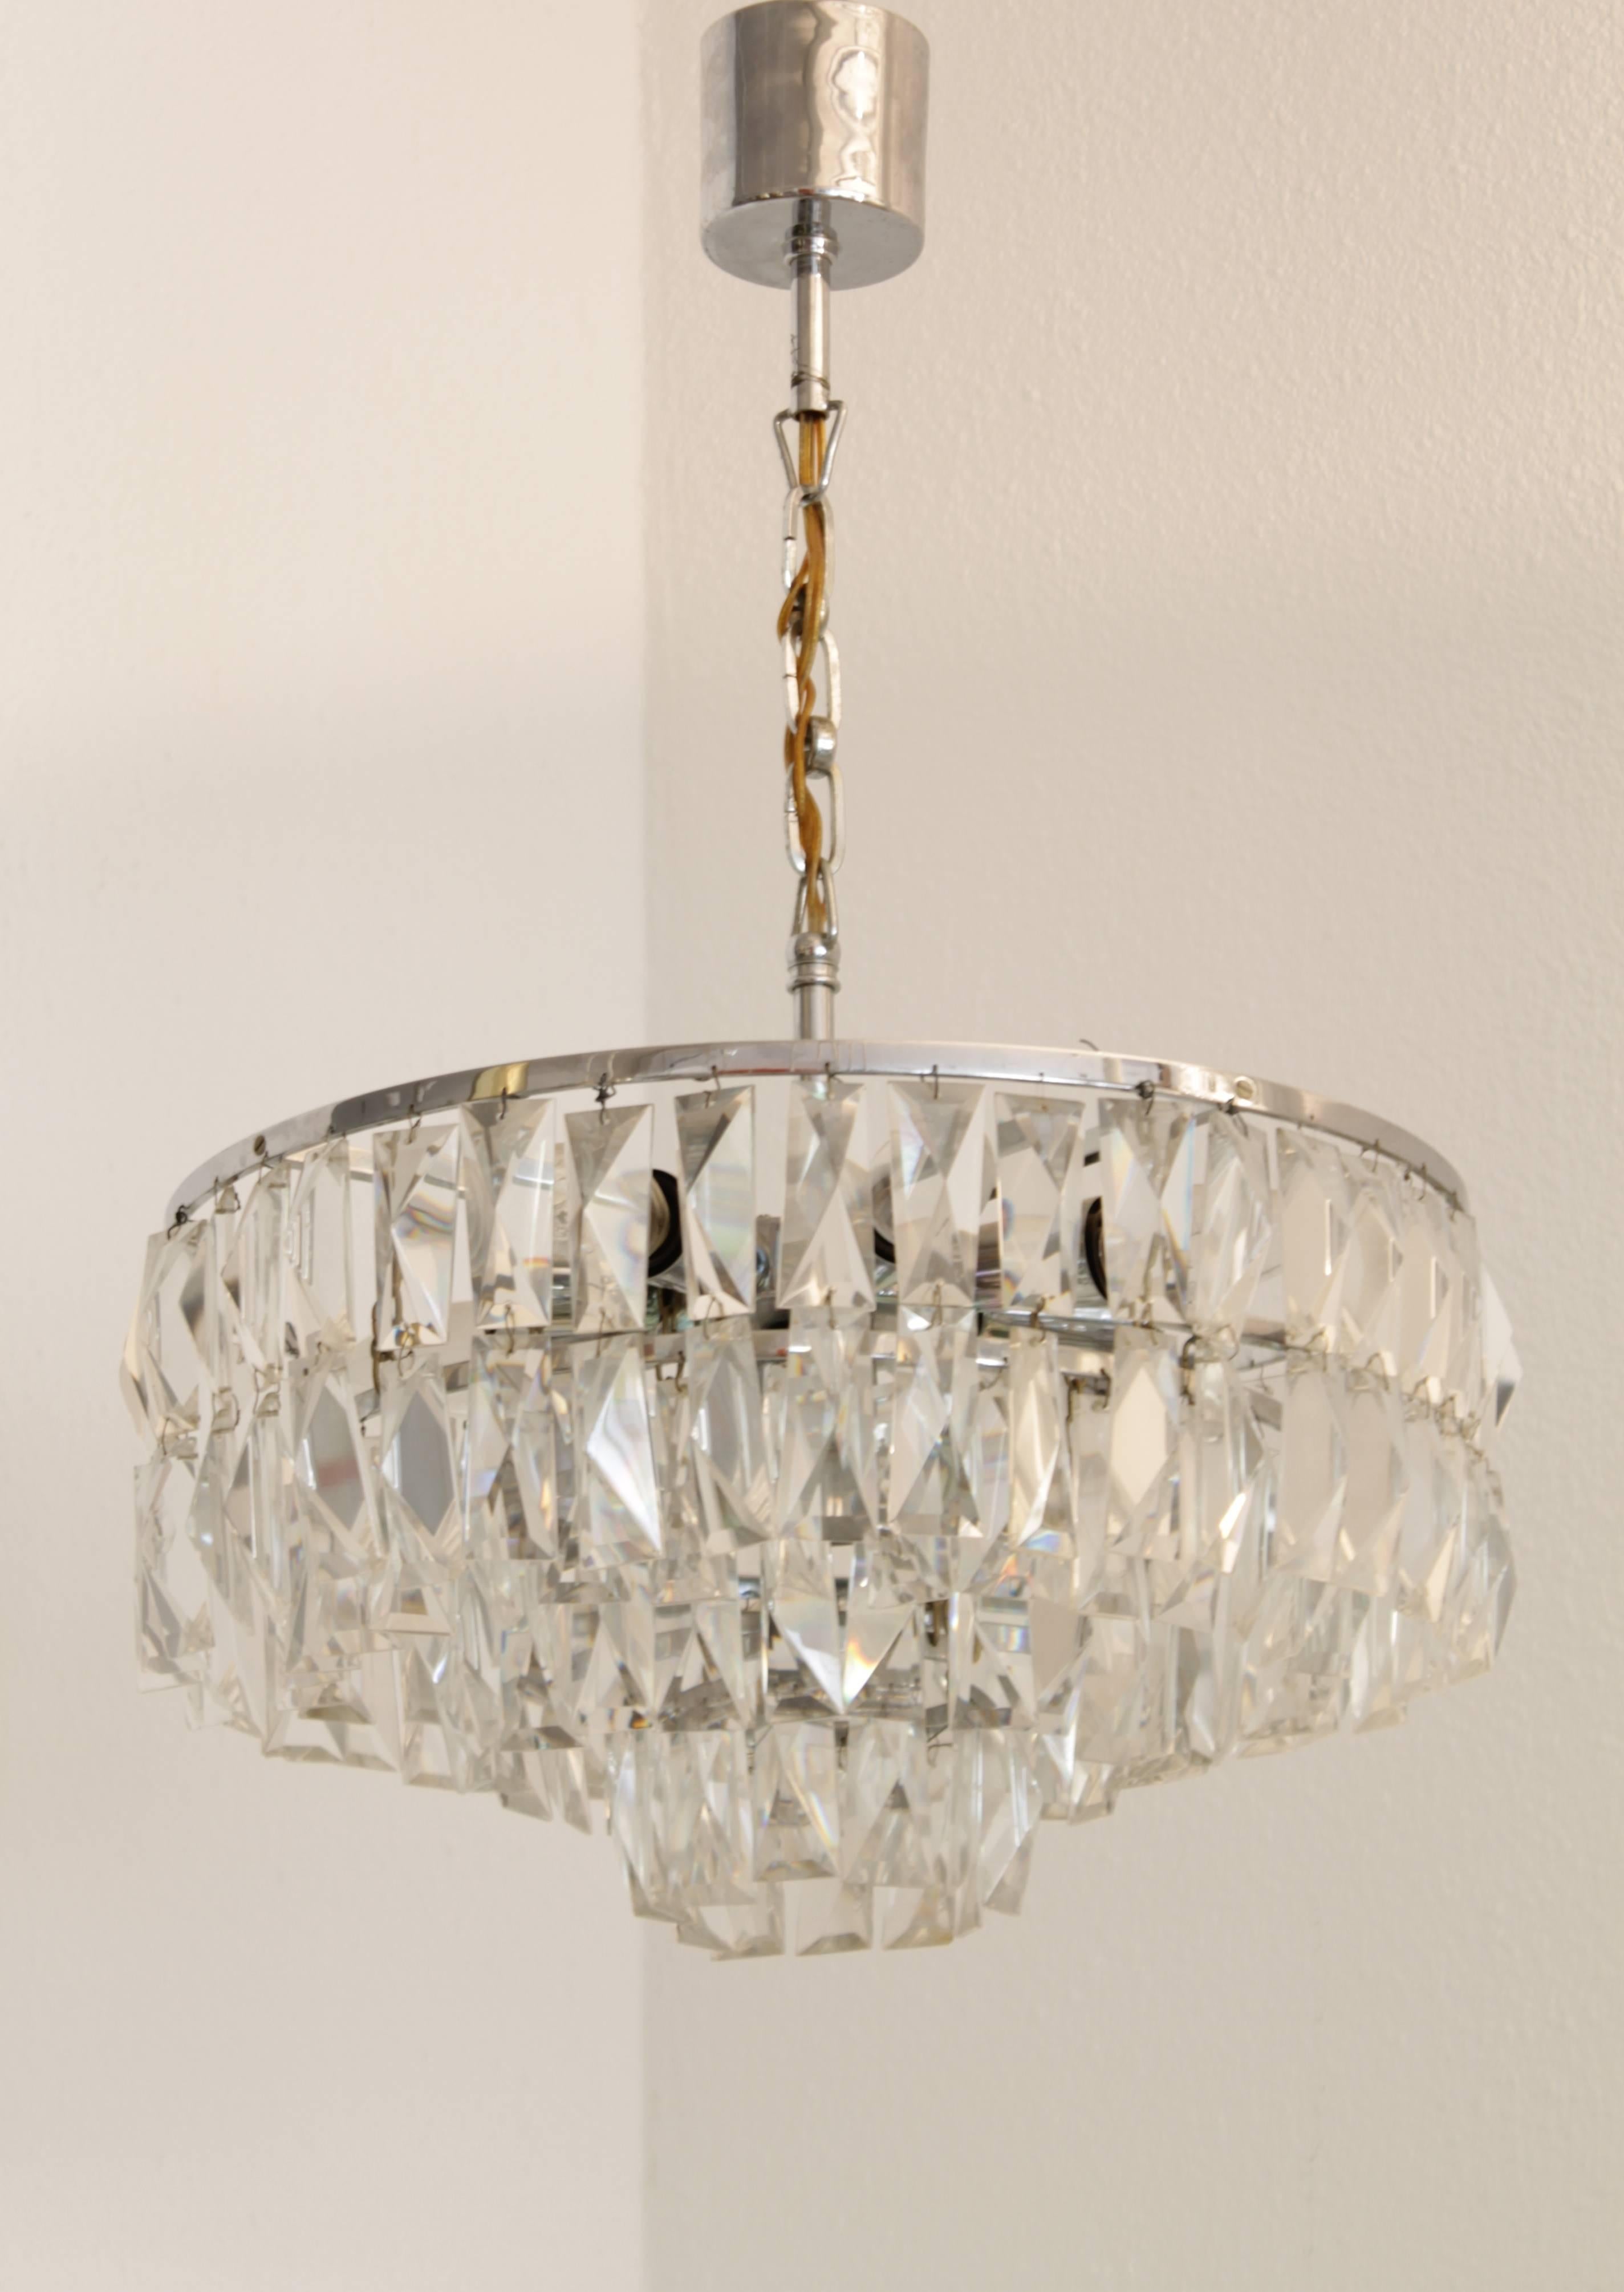 Crystal and chrome chandelier made by Bakalowits and Sohne, Austria, circa 1960s.
2 chandeliers available.